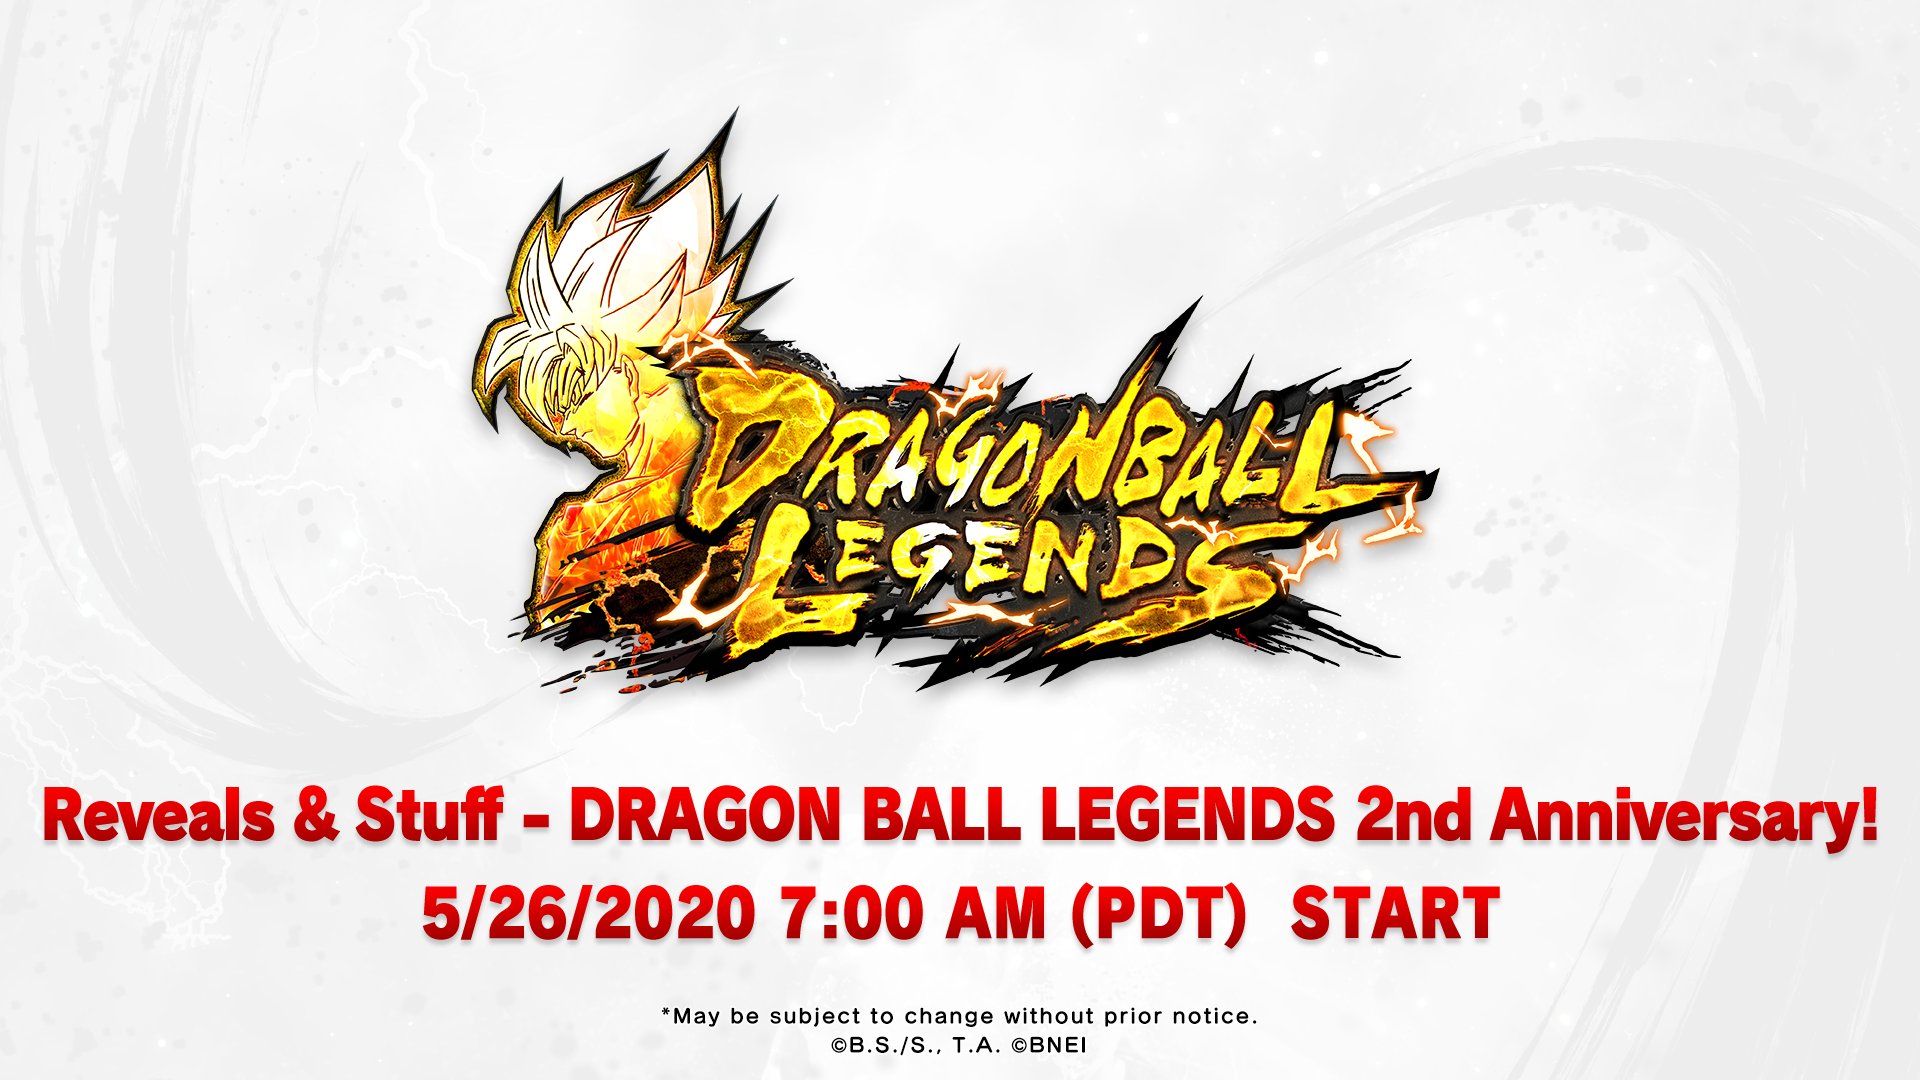 Dragon Ball Legends On Twitter Reveals Stuff Dragon Ball Legends 2nd Anniversary The Legends 2nd Anniversary Information Broadcast Will Be Held On The Following Date 5 26 2020 7 00 Am Pdt Platform